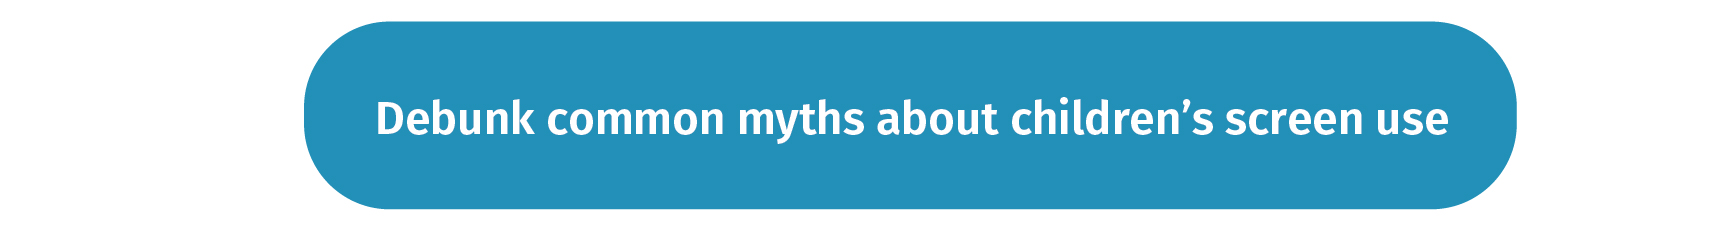 Debunk common myths about childrens screen use